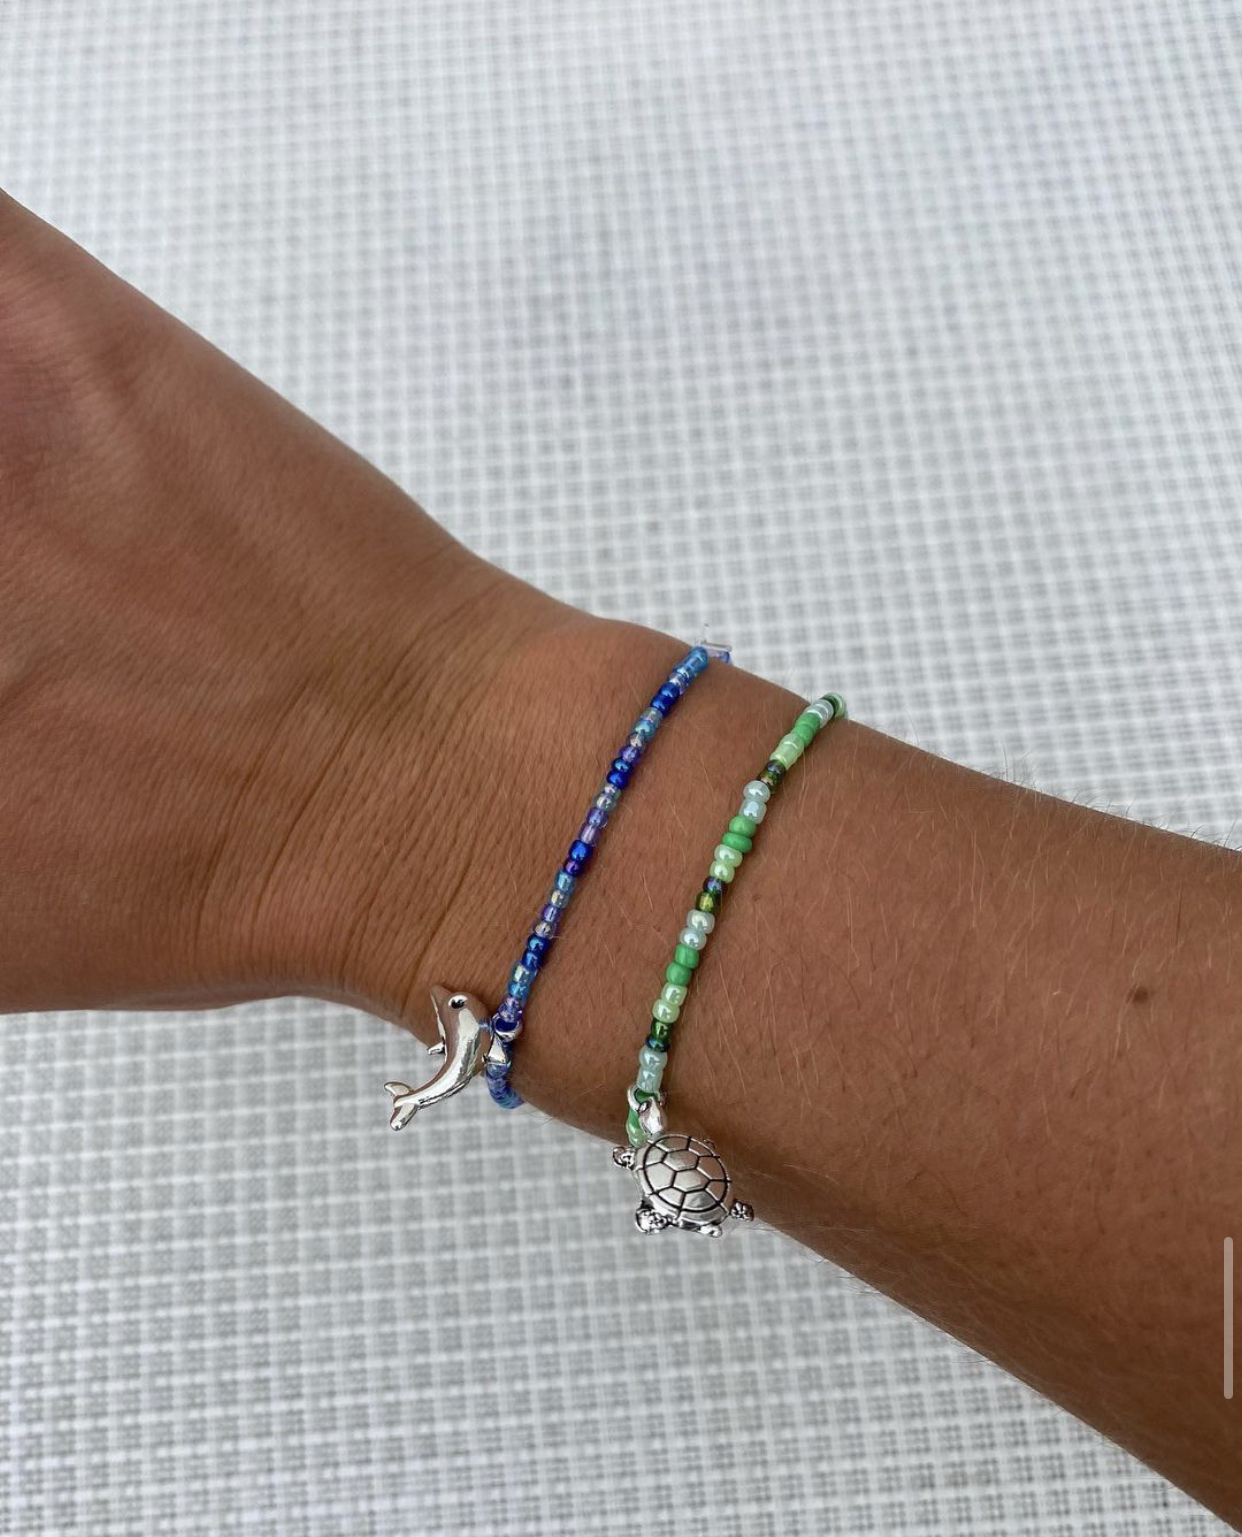 Sophia Beech's bracelet are simple and delicate, often adorned with one small charm, many of which are beach-themed.